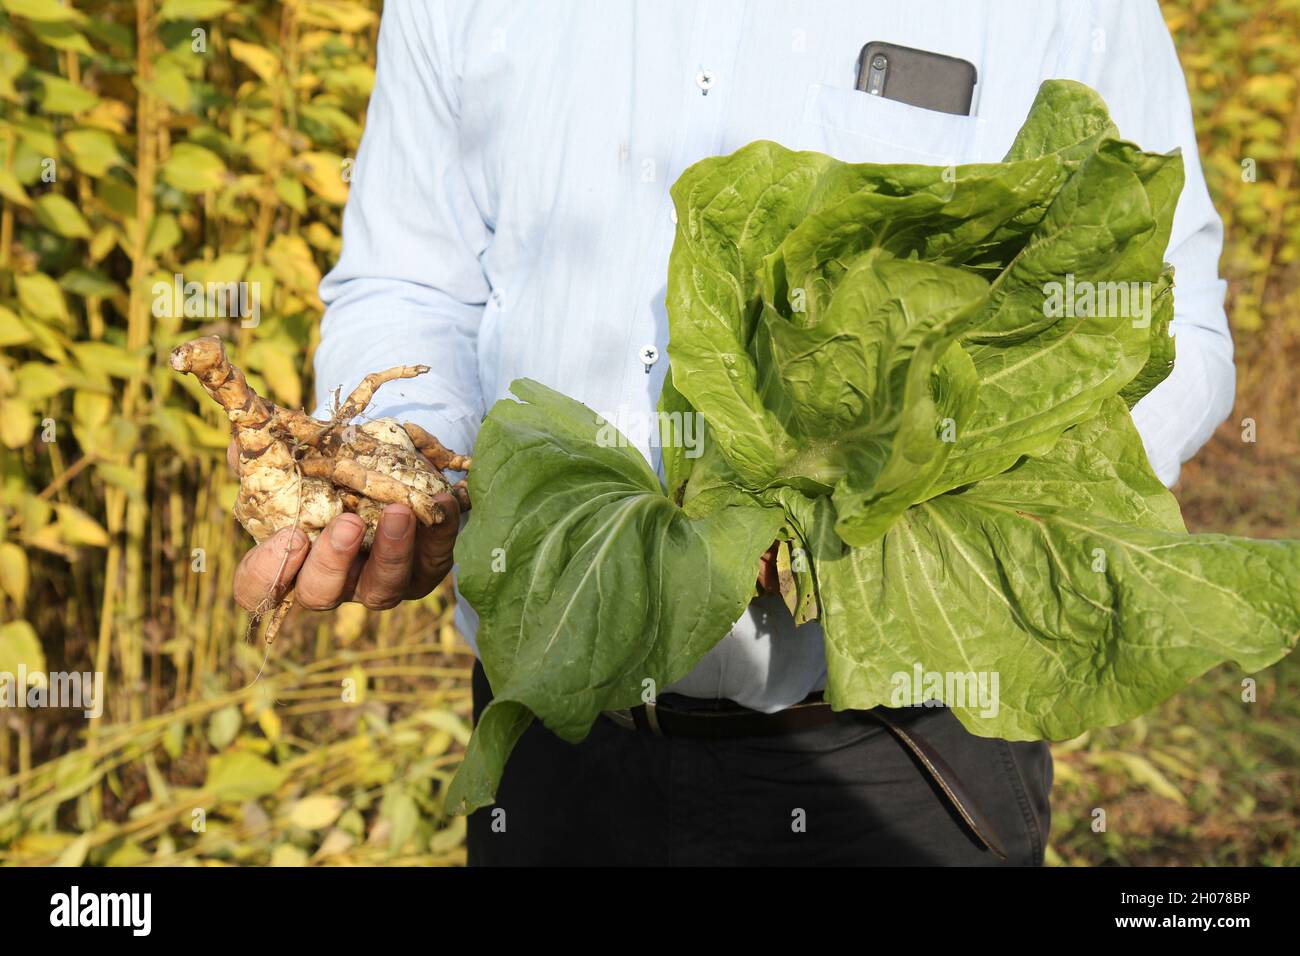 Autumn harvest: Man holding earthy vegetables as topinambour, sunchoke, sugarloaf in hand. Stock Photo